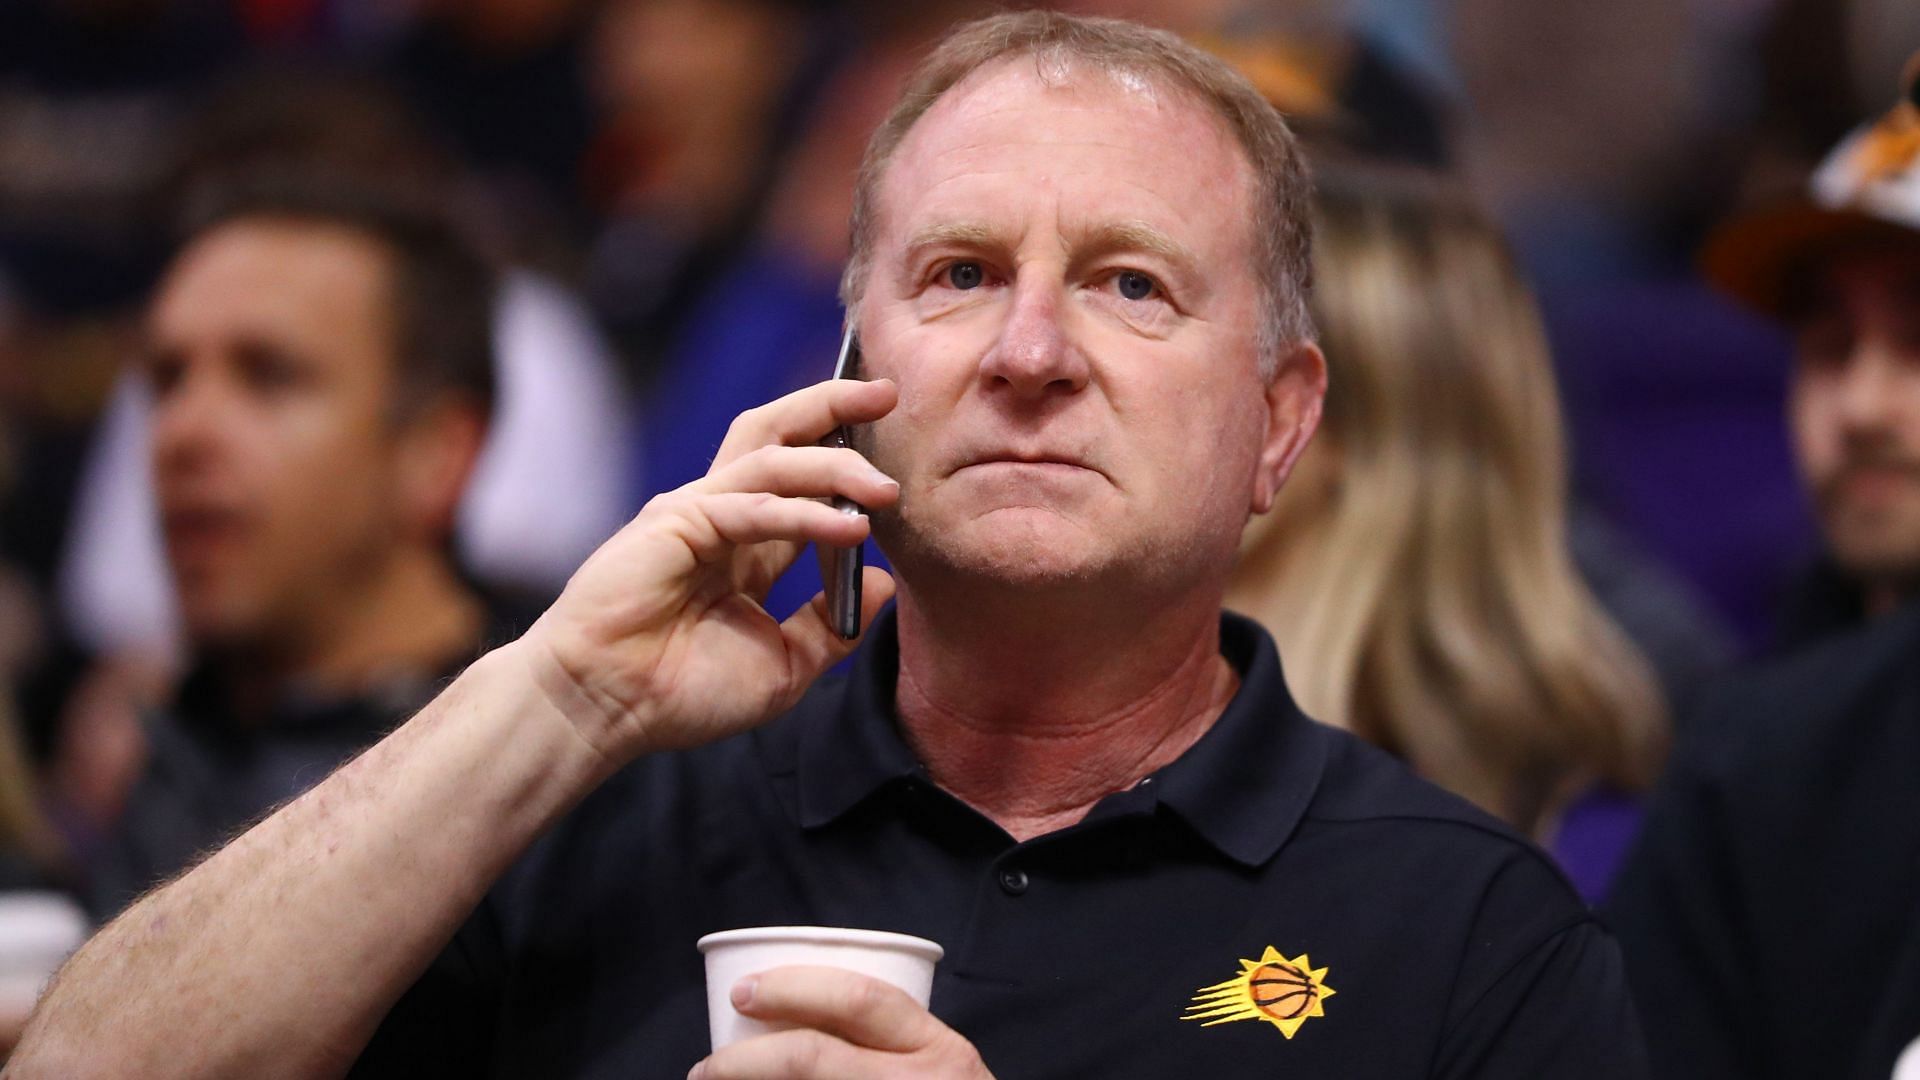 Adam Silver commented on the recent suspension of Phoenix Suns owner Robert Sarver